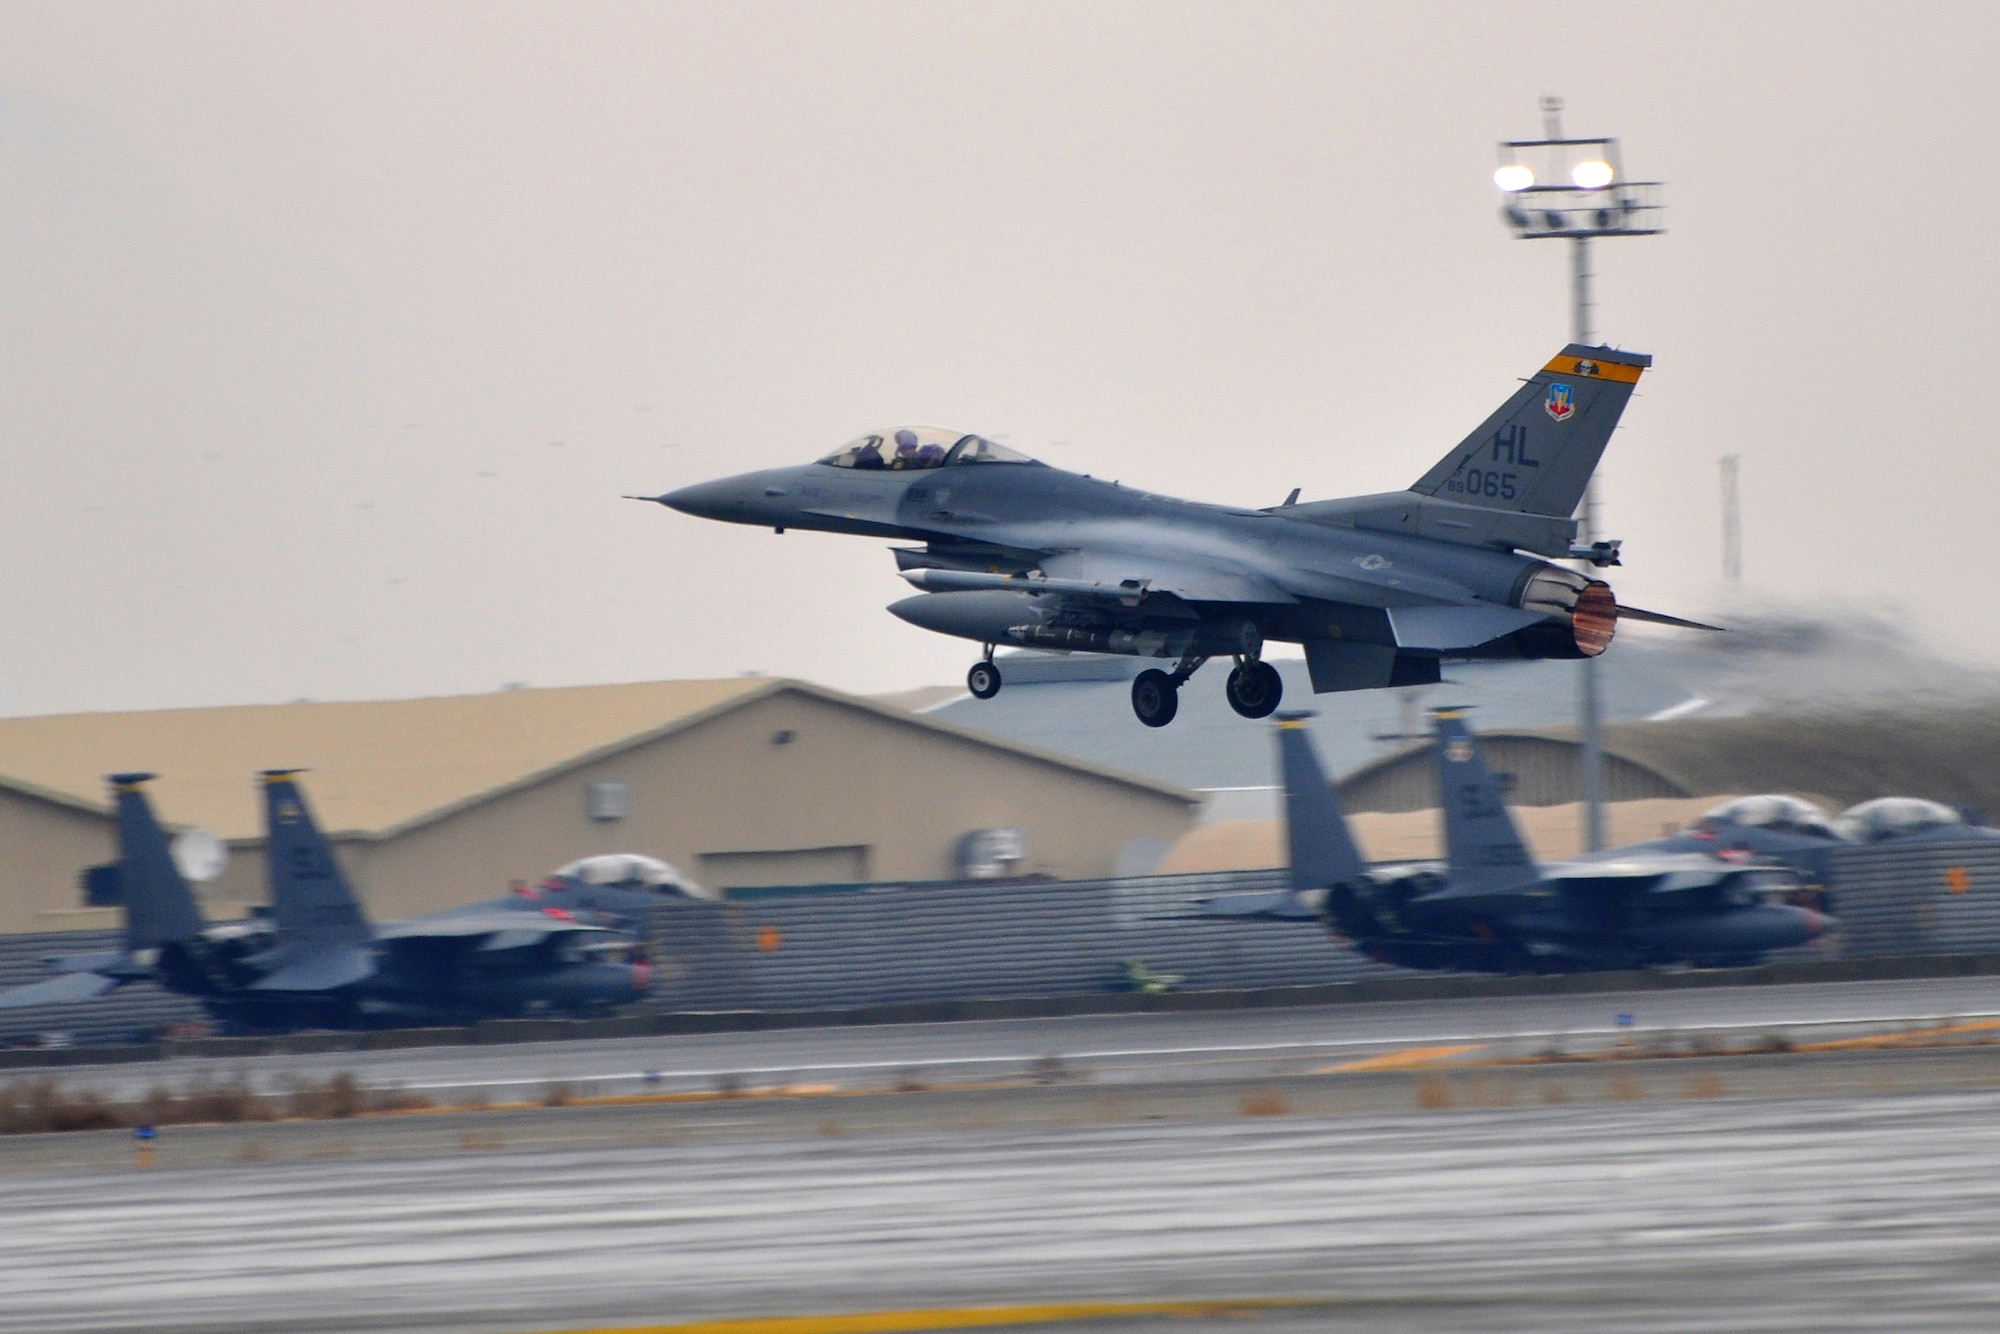 An F-16 Fighting Falcon belonging to the 4th Expeditionary Fighting Squadron takes off from Bagram Airfield, Afghanistan, March 9, 2011. The 4th EFS launch F-16s around the clock in support of Operation Enduring Freedom. (U.S. Air Force photo by Capt. Erick Saks) 